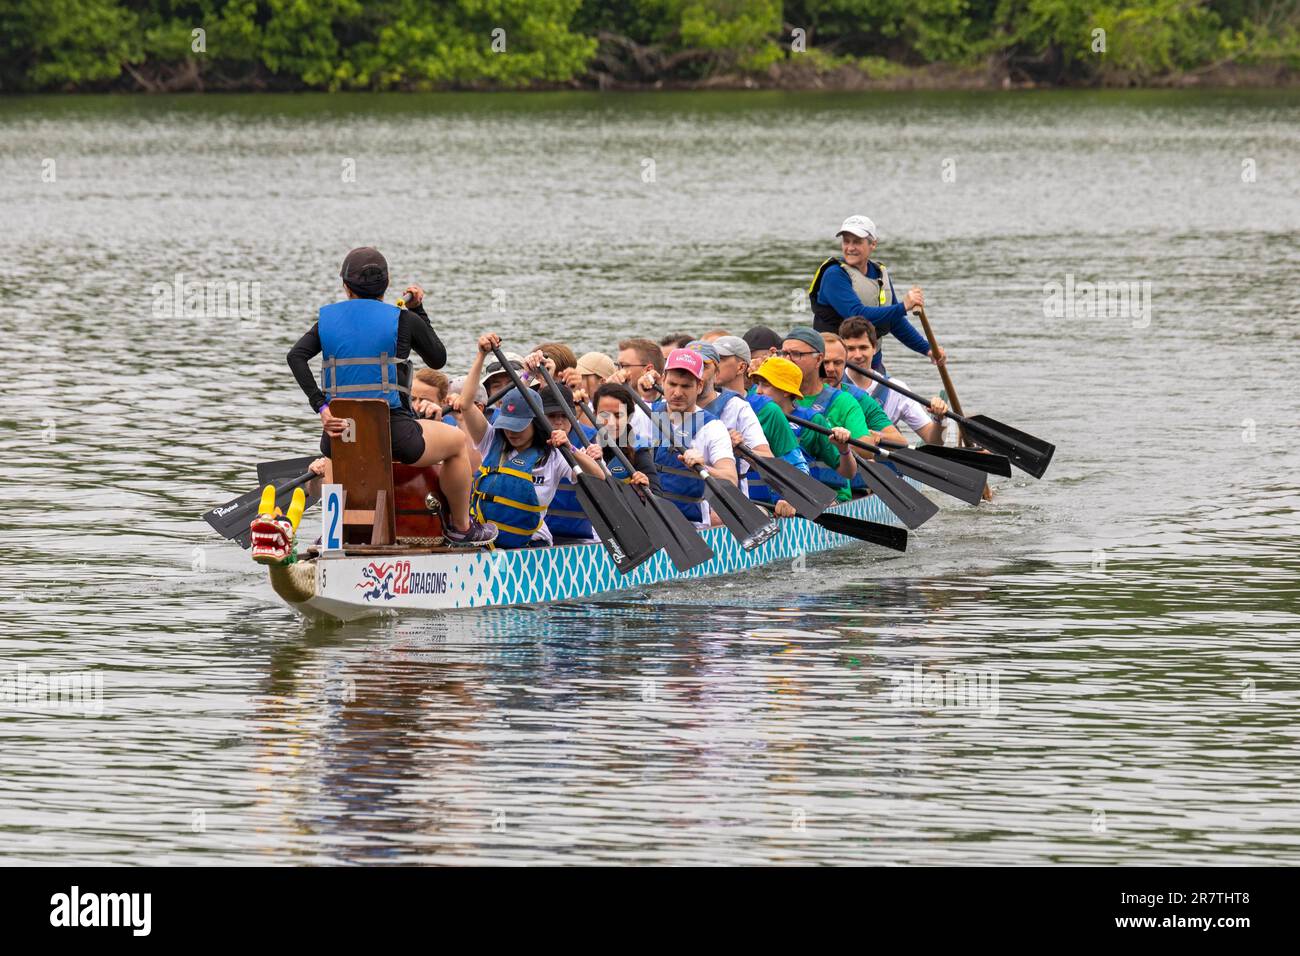 Washington, DC, The DC Dragon Boat Festival on the Potomac River. Dragon boating is a 2300-year-old Chinese tradition. The Washington festival has Stock Photo